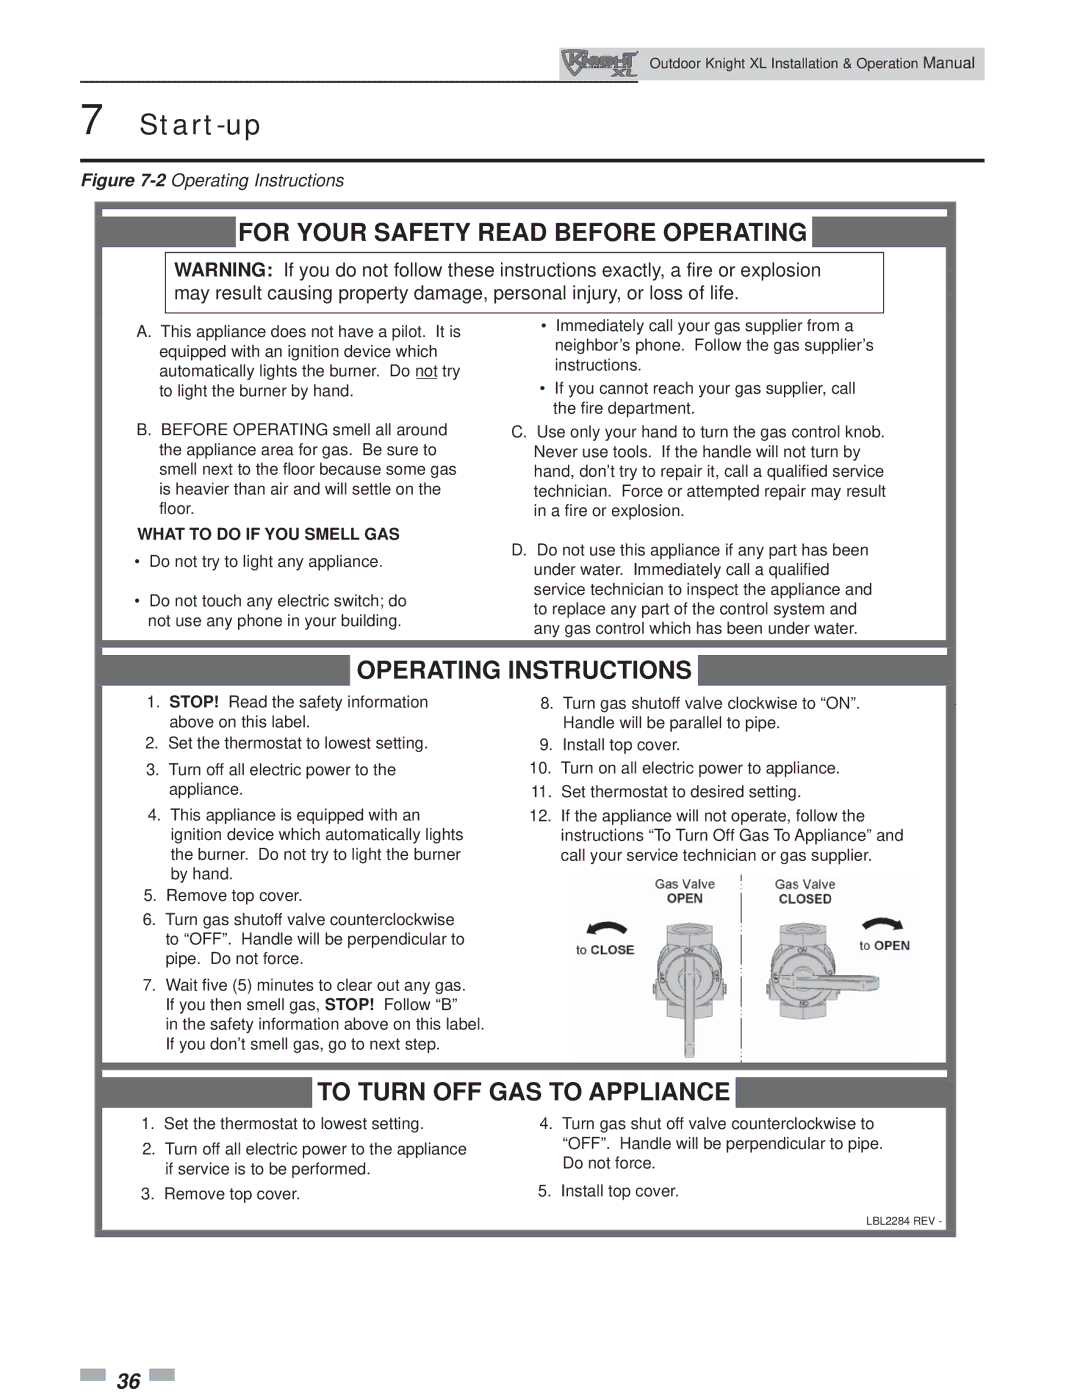 Lochinvar 400-801 operation manual For Your Safety Read Before Operating 